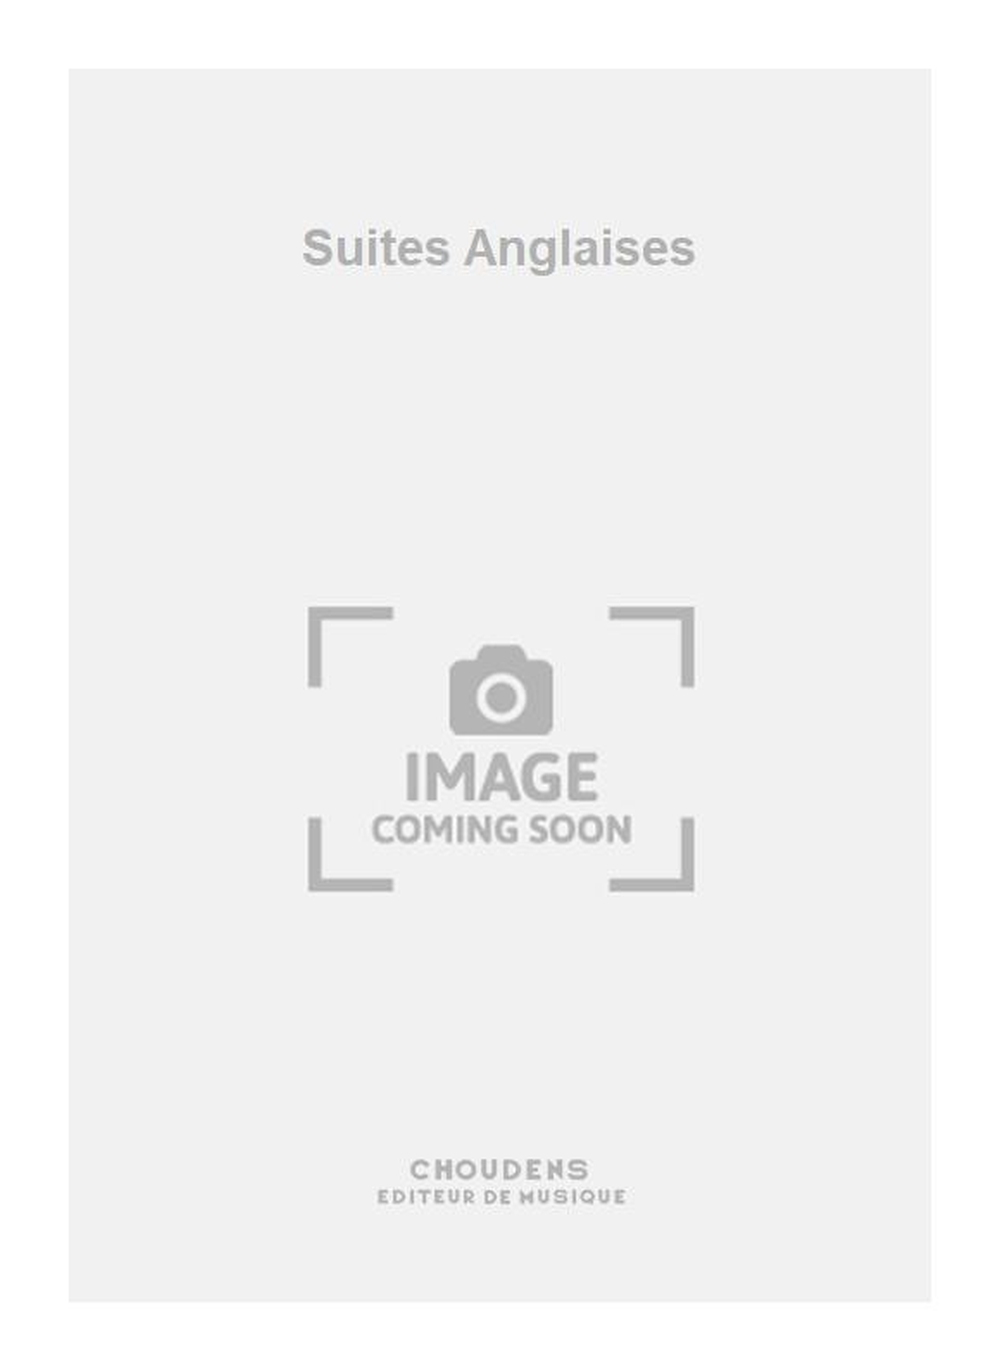 Suites Anglaises